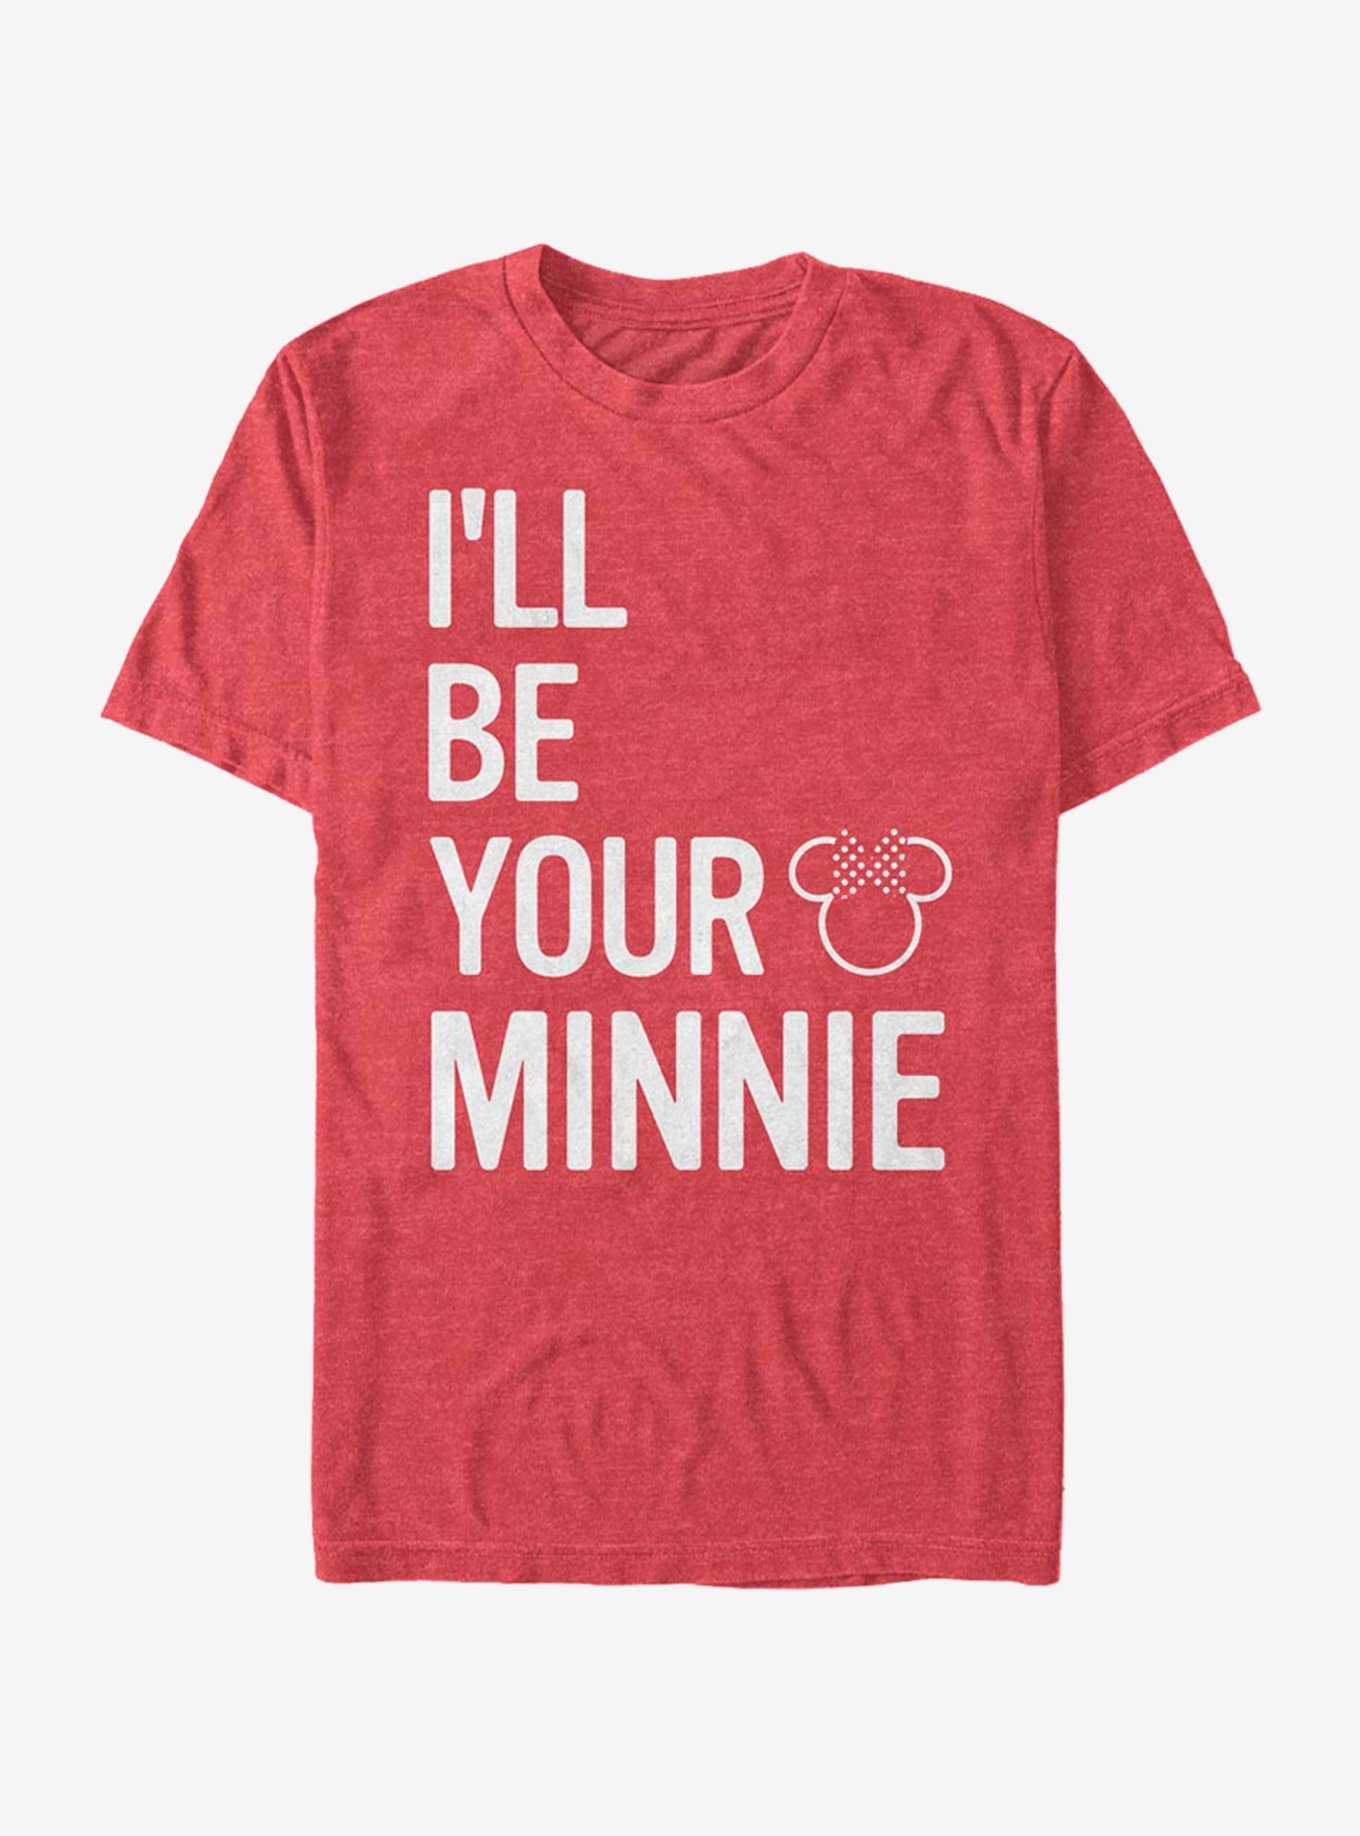 Disney Mickey Mouse Your Minnie T-Shirt, , hi-res